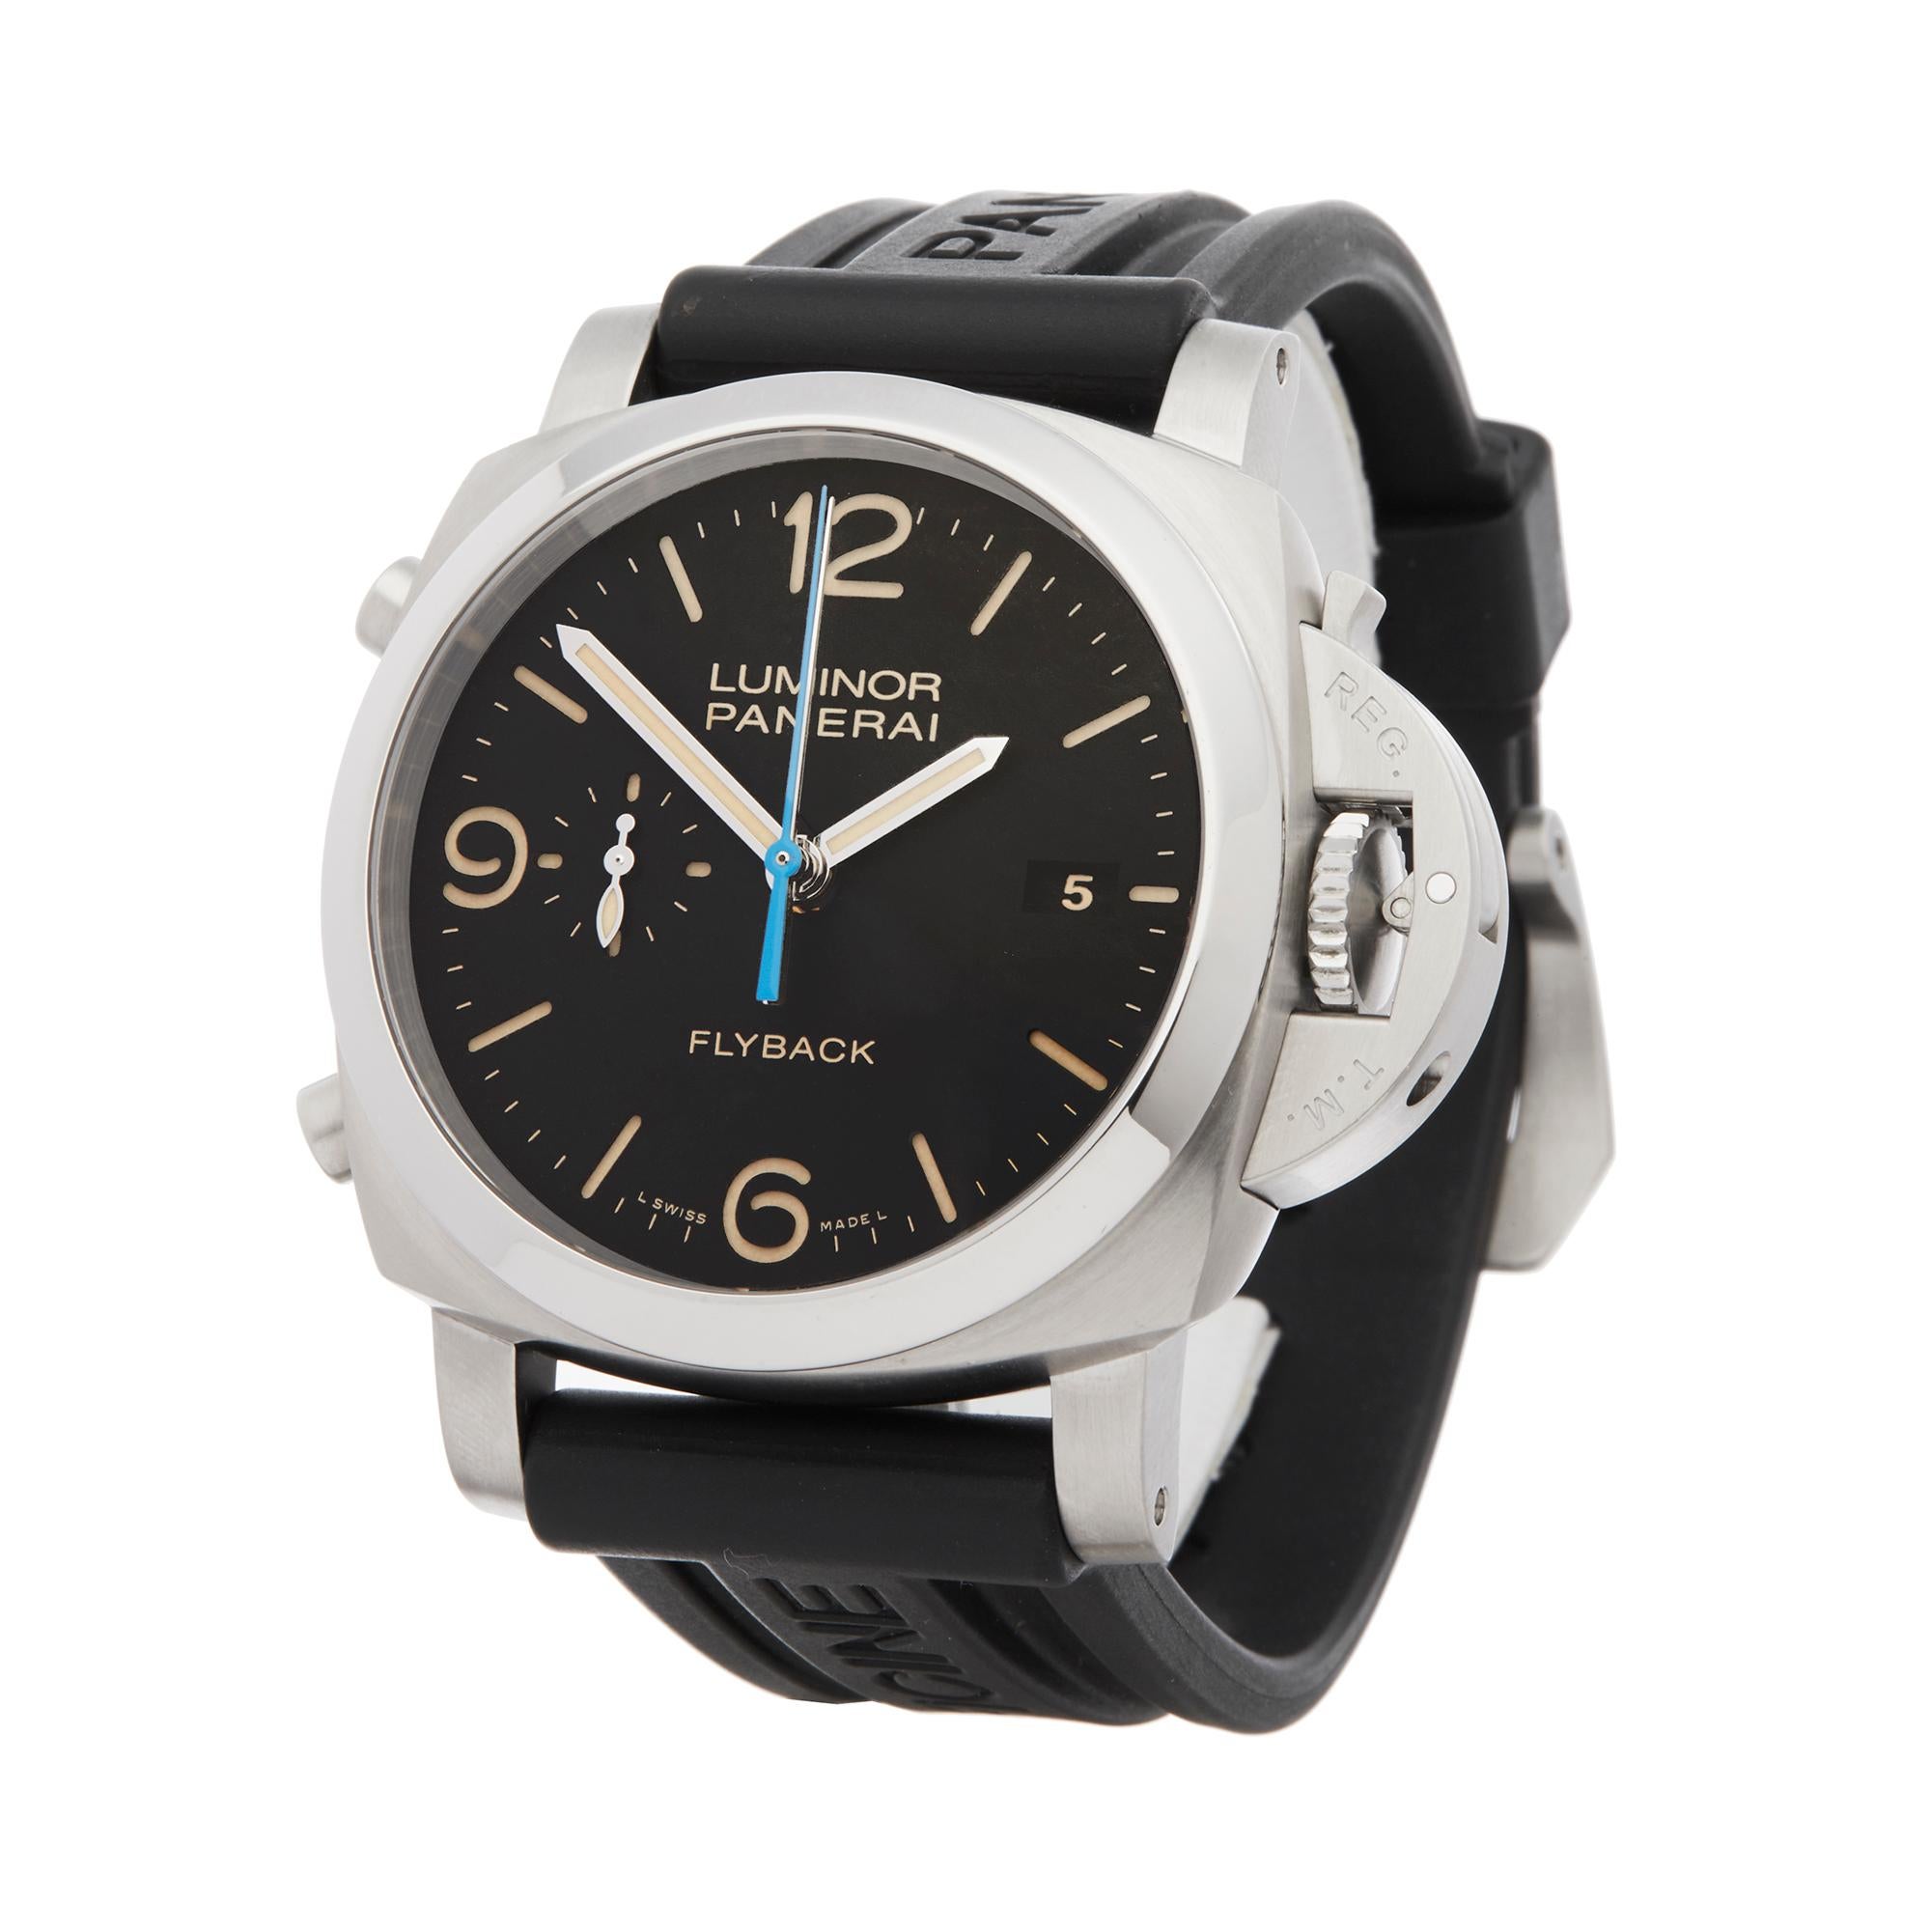 Ref: W6212
Manufacturer: Panerai
Model: Luminor
Model Ref: PAM00524
Age: 15th March 2015
Gender: Mens
Complete With: Box, Manuals, Guarantee, Spare Strap, Tools, Servicing Pouch and Servicing Papers dated 15th July 2019 
Dial: Black Arabic
Glass: